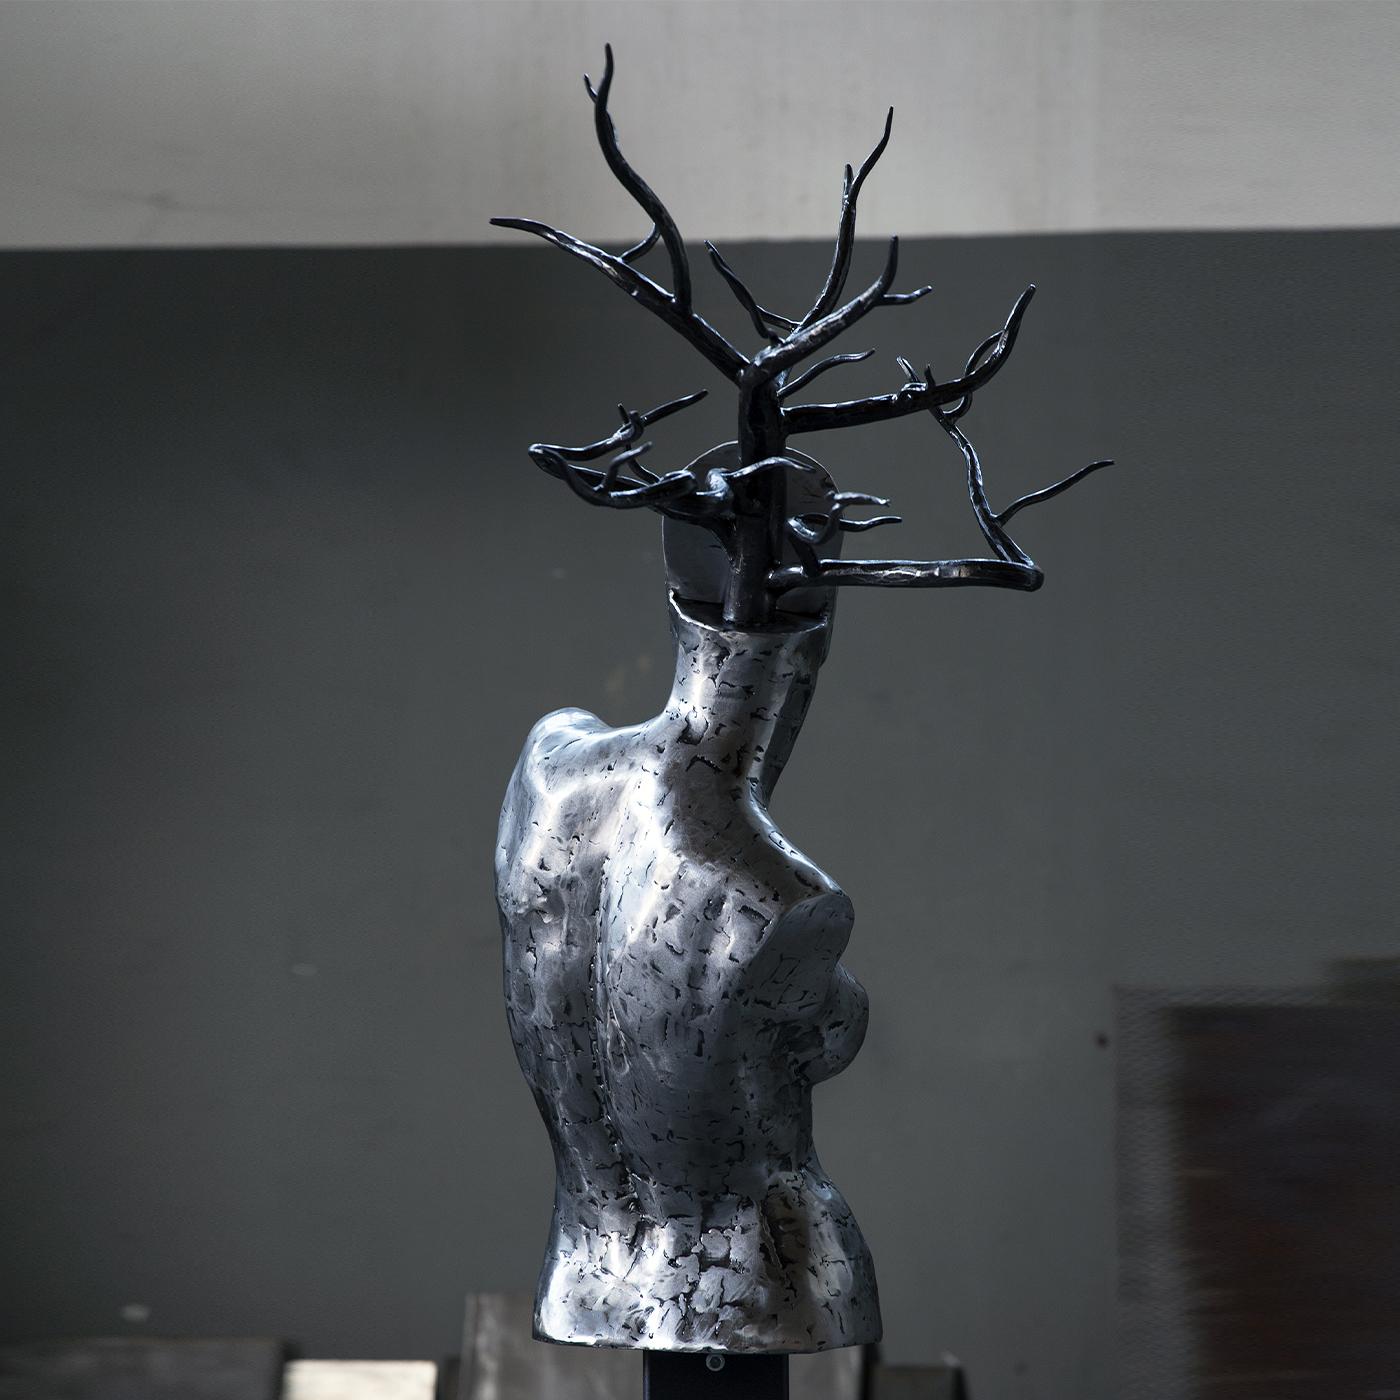 Named after the Italian word for symbiosis, this sculpture embodies the difficult yet symbiotical relationship between man and Nature. Perfect for any contemporary or classic decor alike, it is handcrafted of iron, comprised of shaped and welded